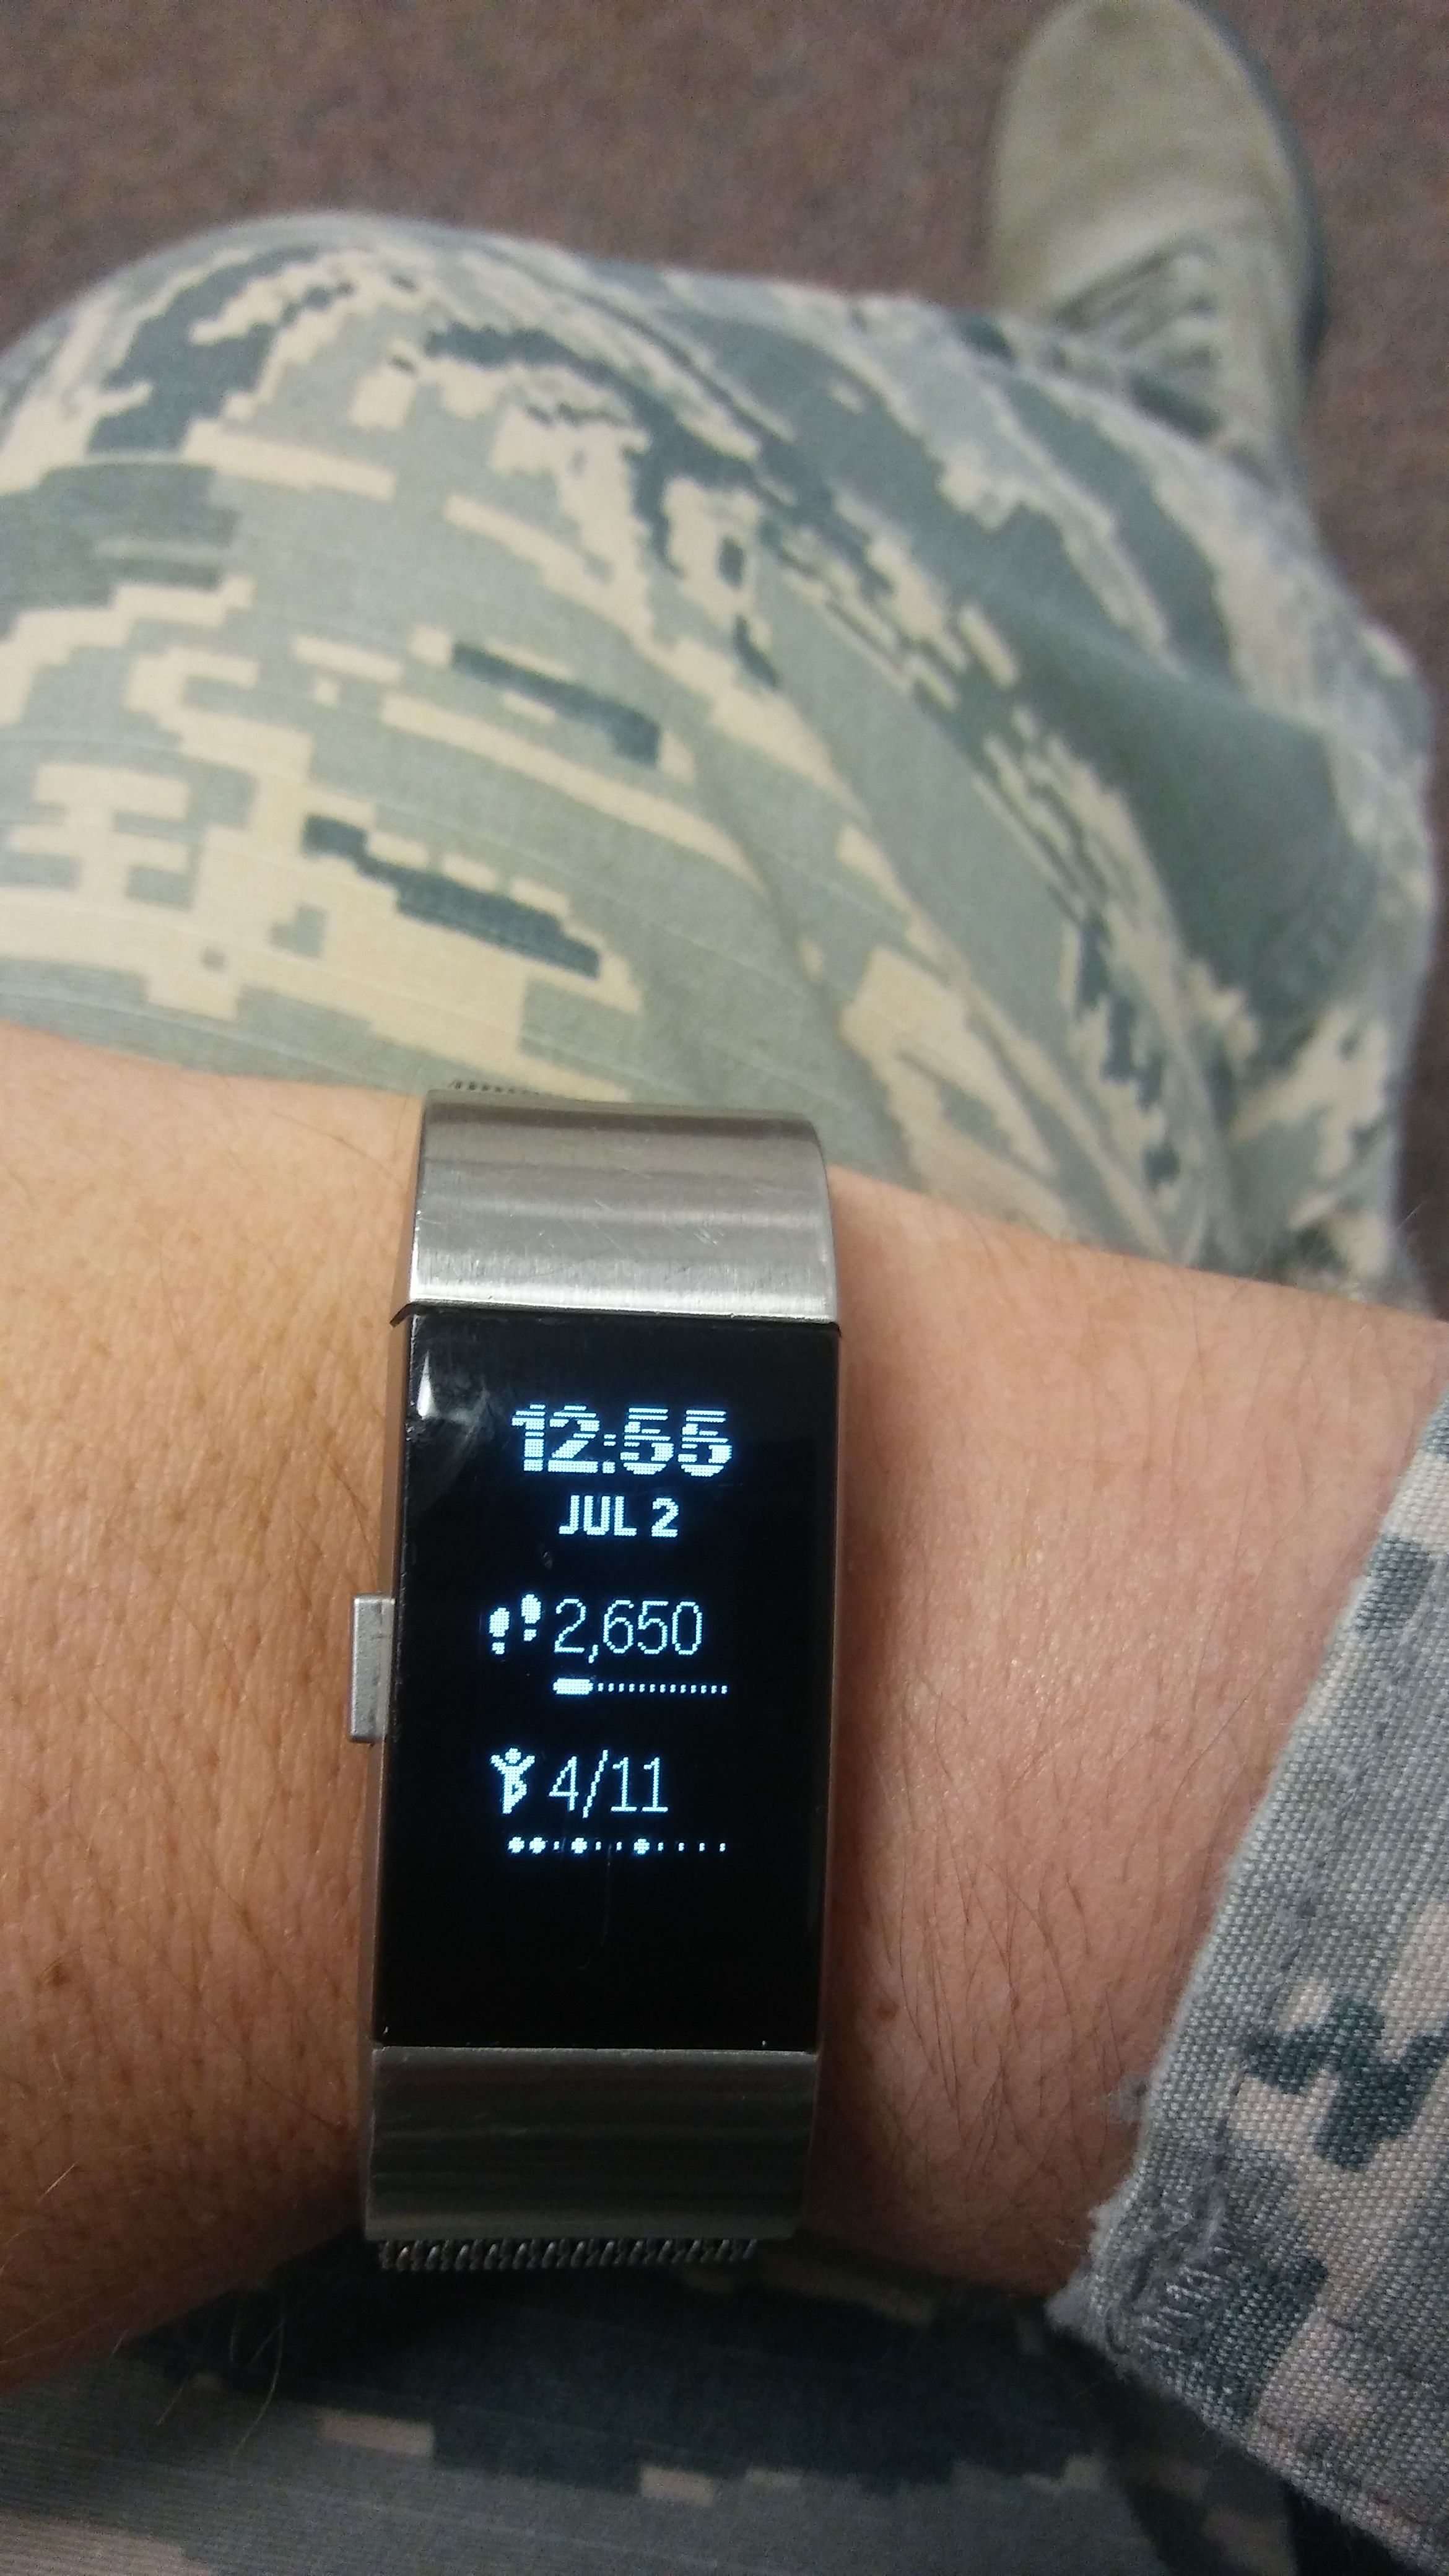 fitbit has a line on the screen